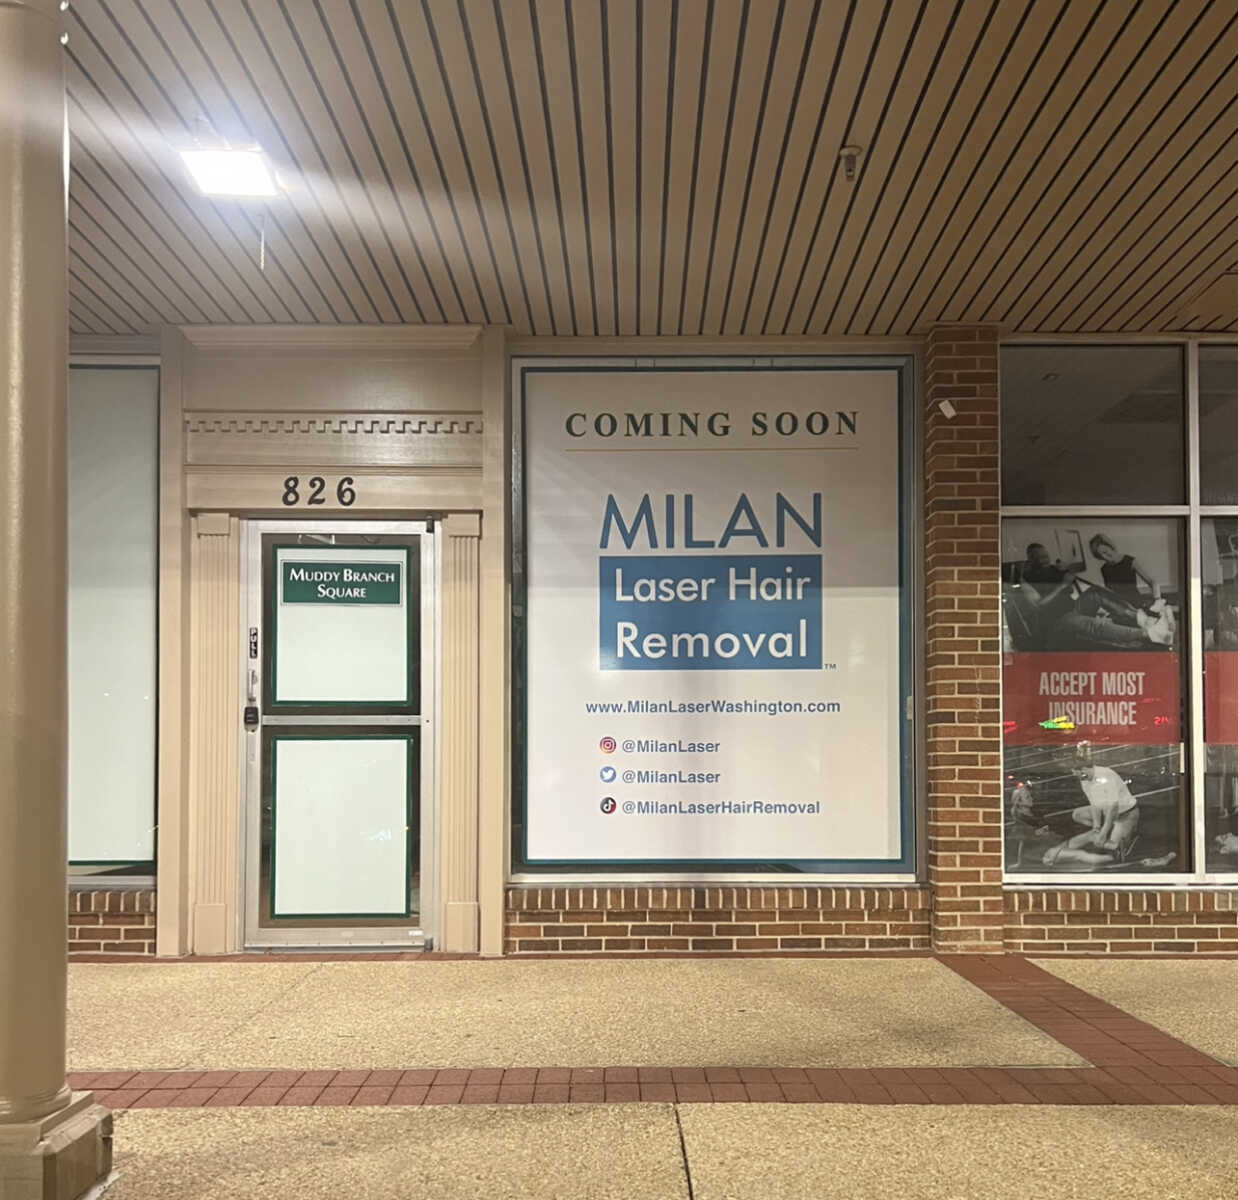 Milan Laser Hair Removal Coming Soon to Muddy Branch Square - The MoCo Show